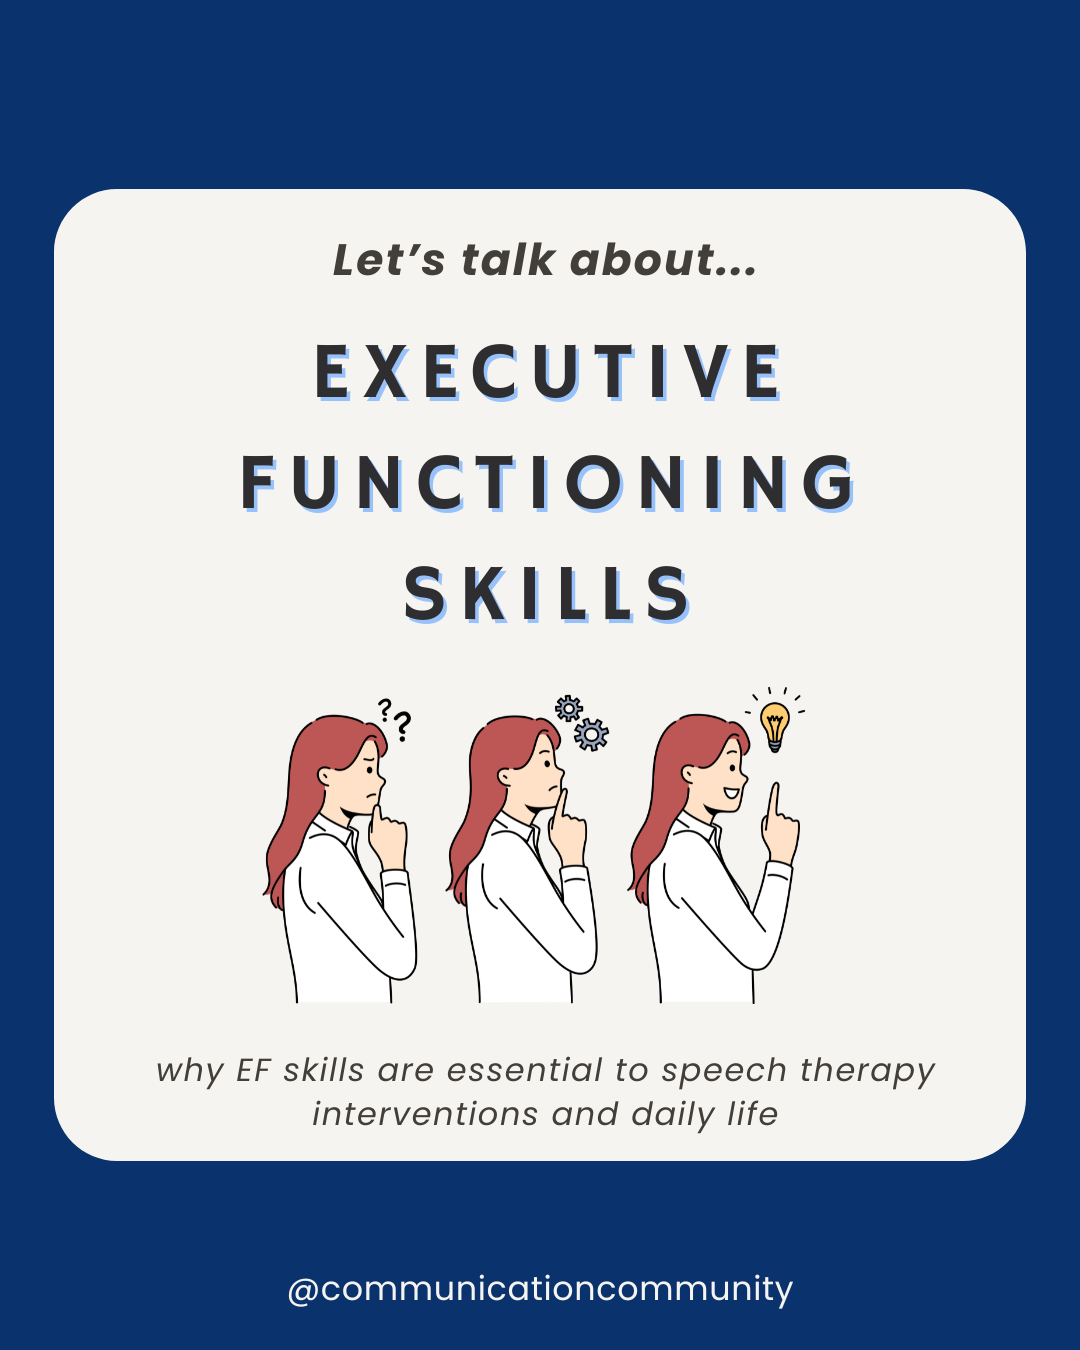 Executive Functioning and Speech Therapy: Why is it Relevant to Treatment and Day-to-Day Life?